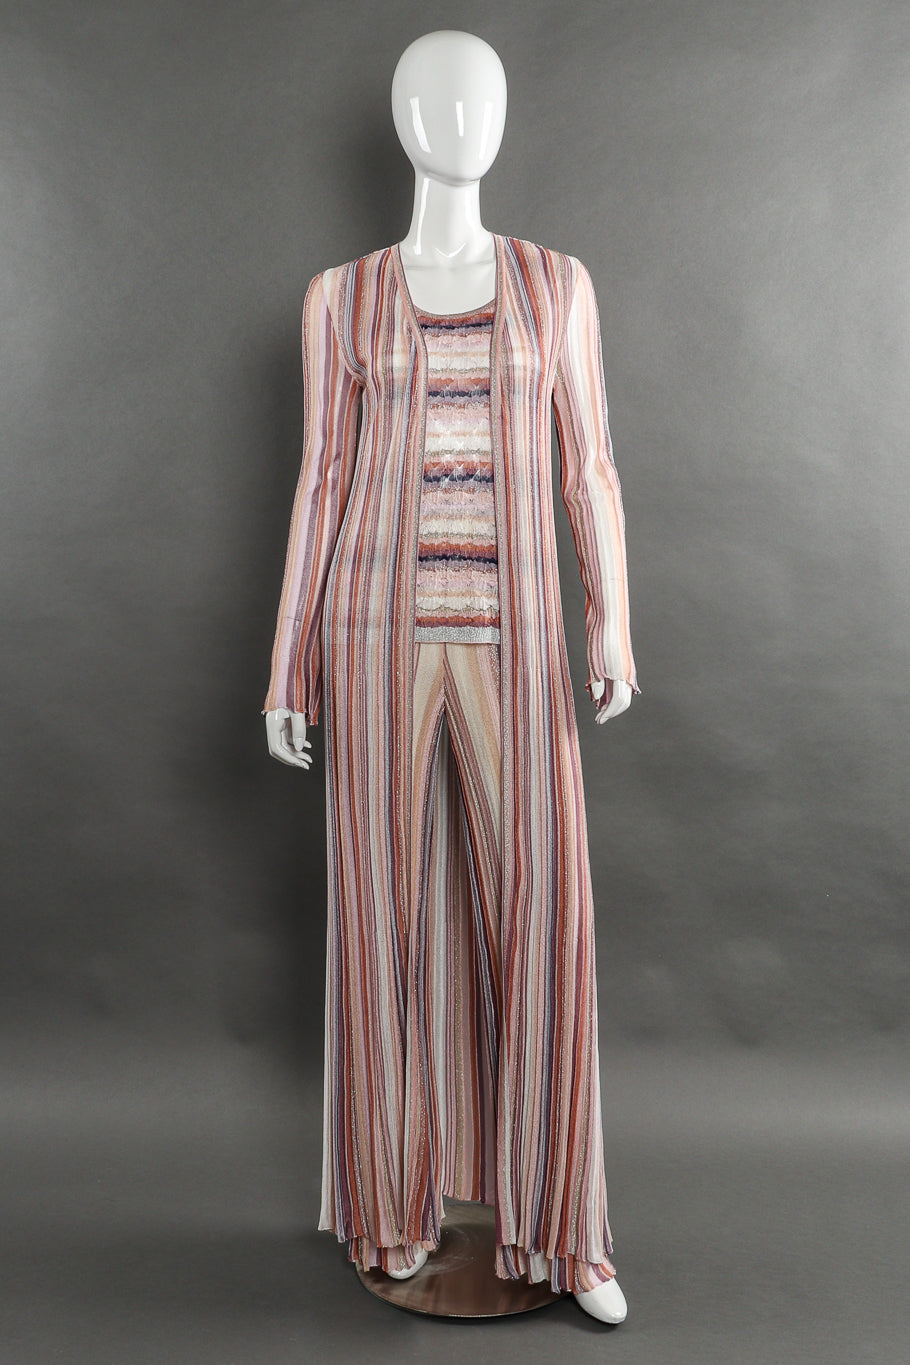 Missoni Striped Knit Duster, Tank, and Pants Set front view on mannequin @Recessla